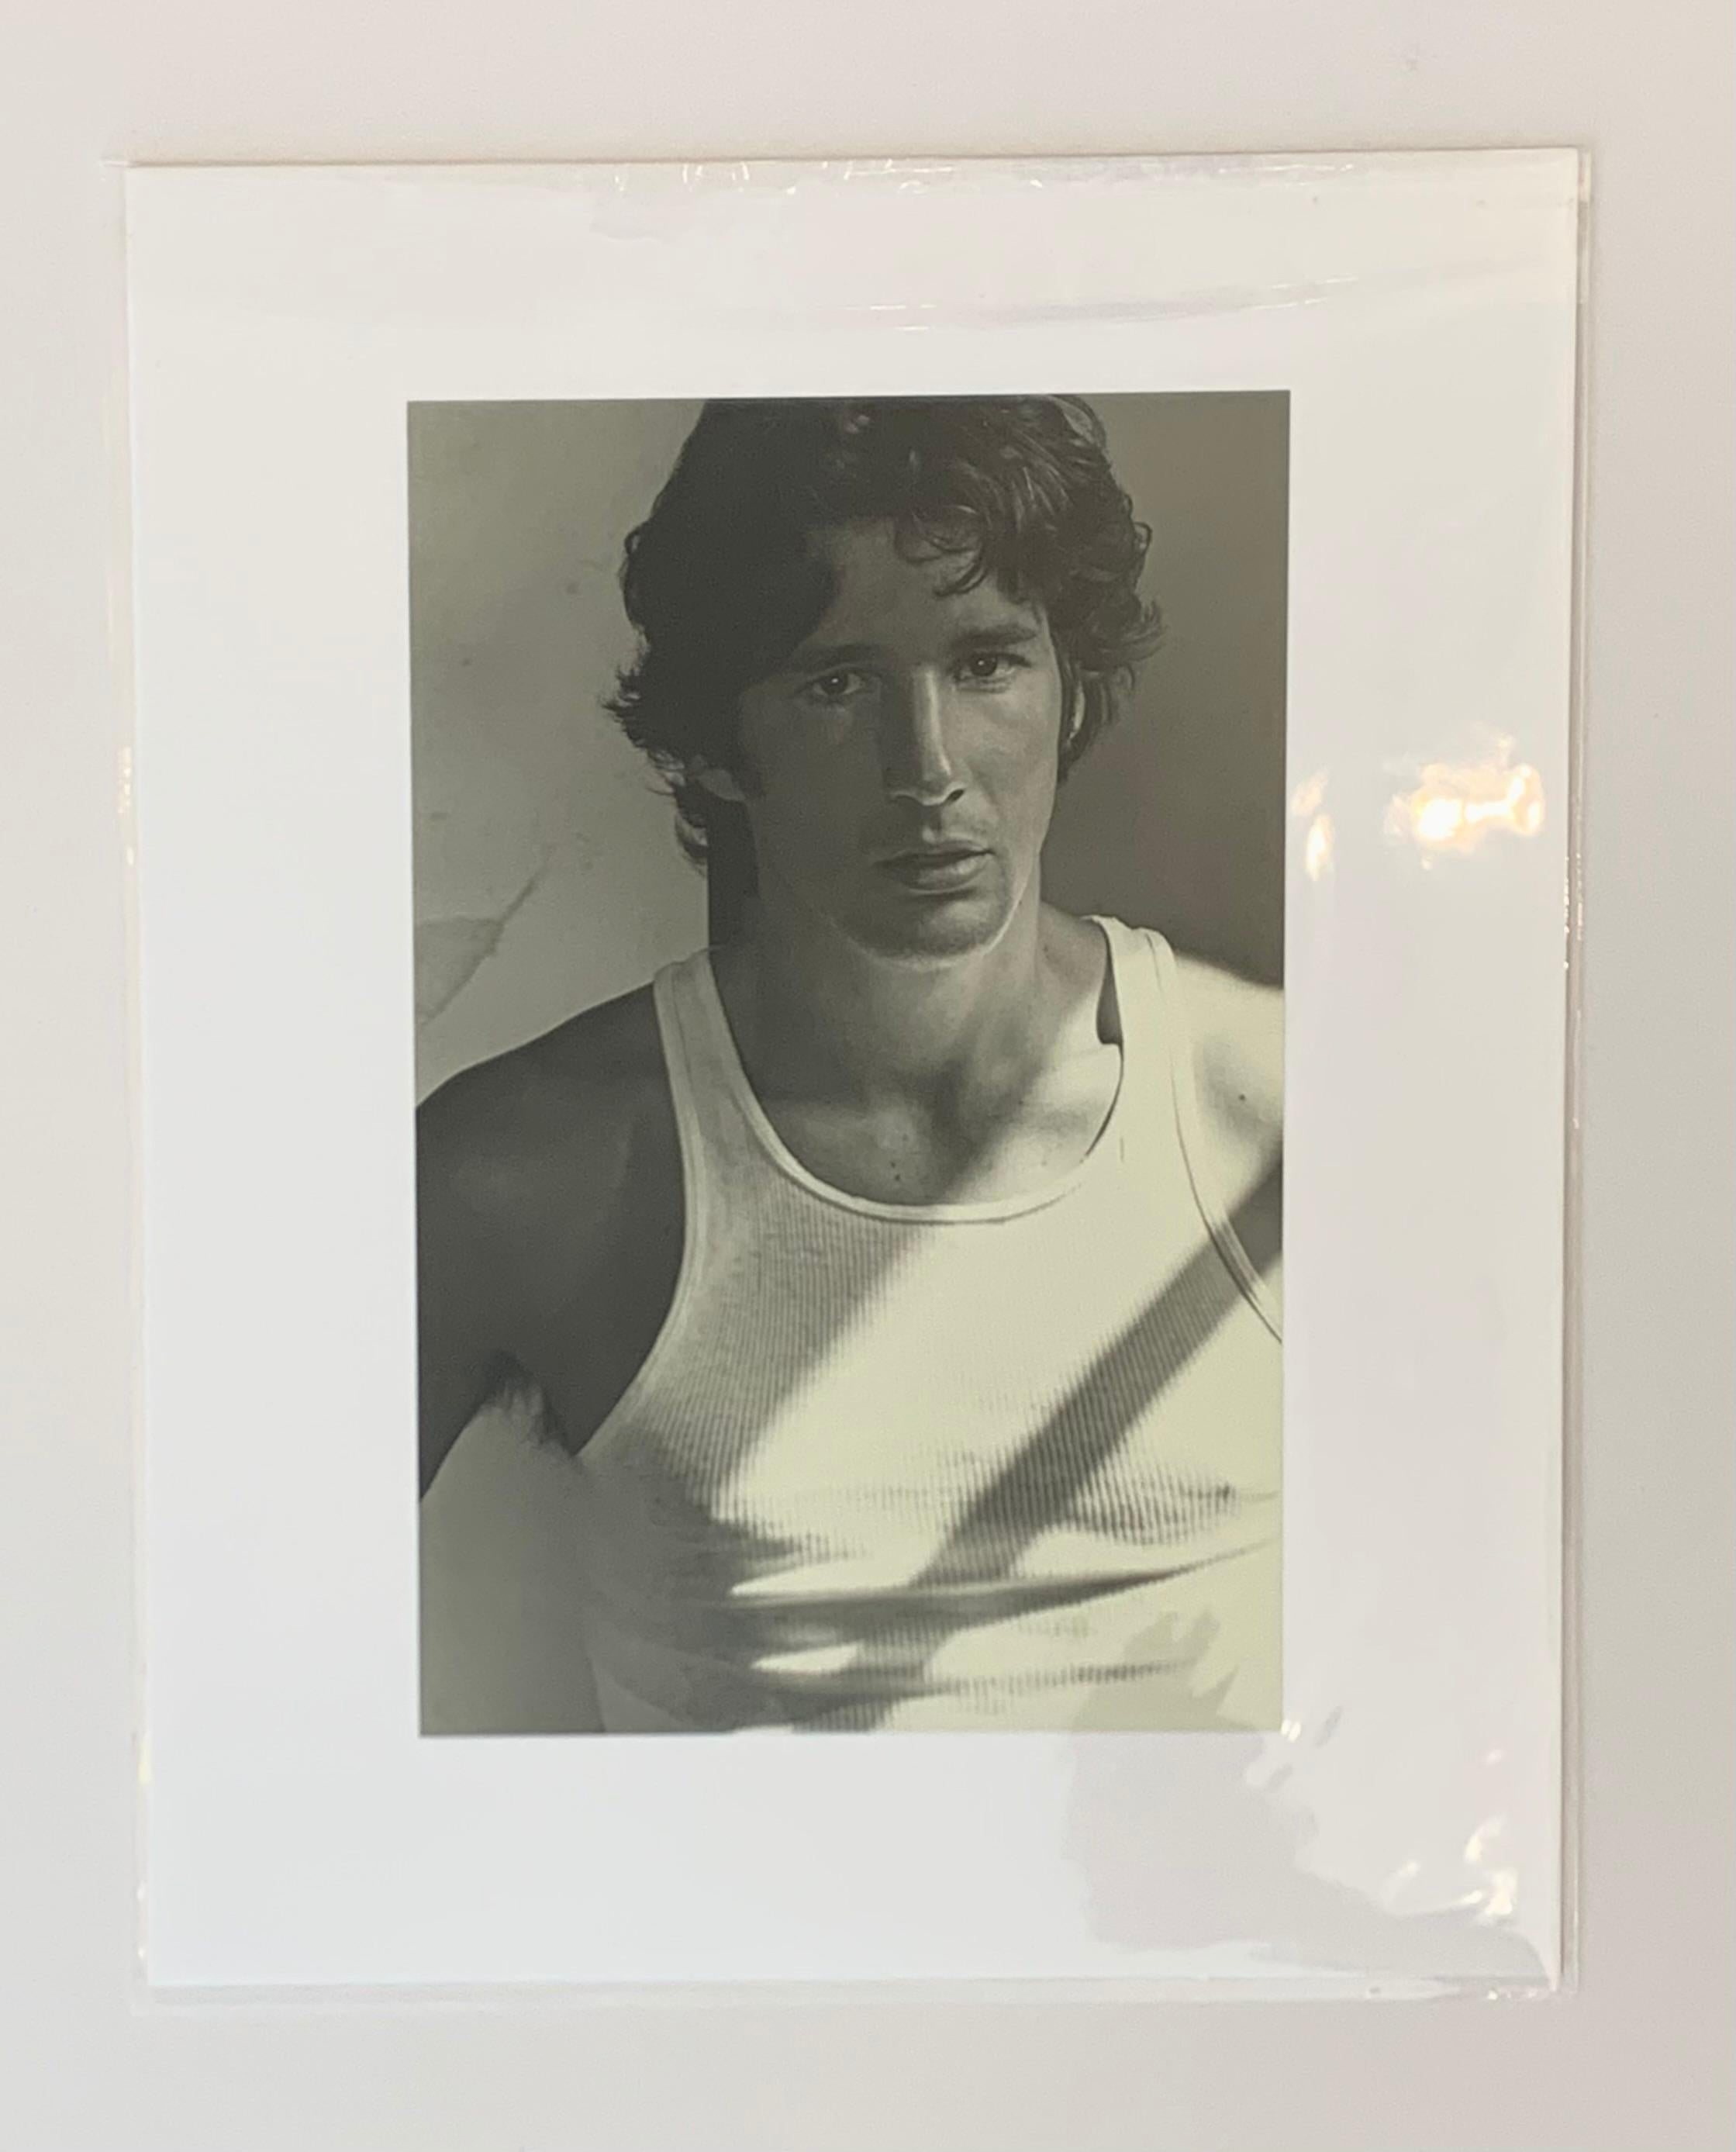 Richard Gere, Close-Up, San Bernardino 1988
by Herb Ritts

A close up shot with the iconic Richard Gere through the lens of Herb Ritts.

Unframed
Matted
Overall size : 11 x 14